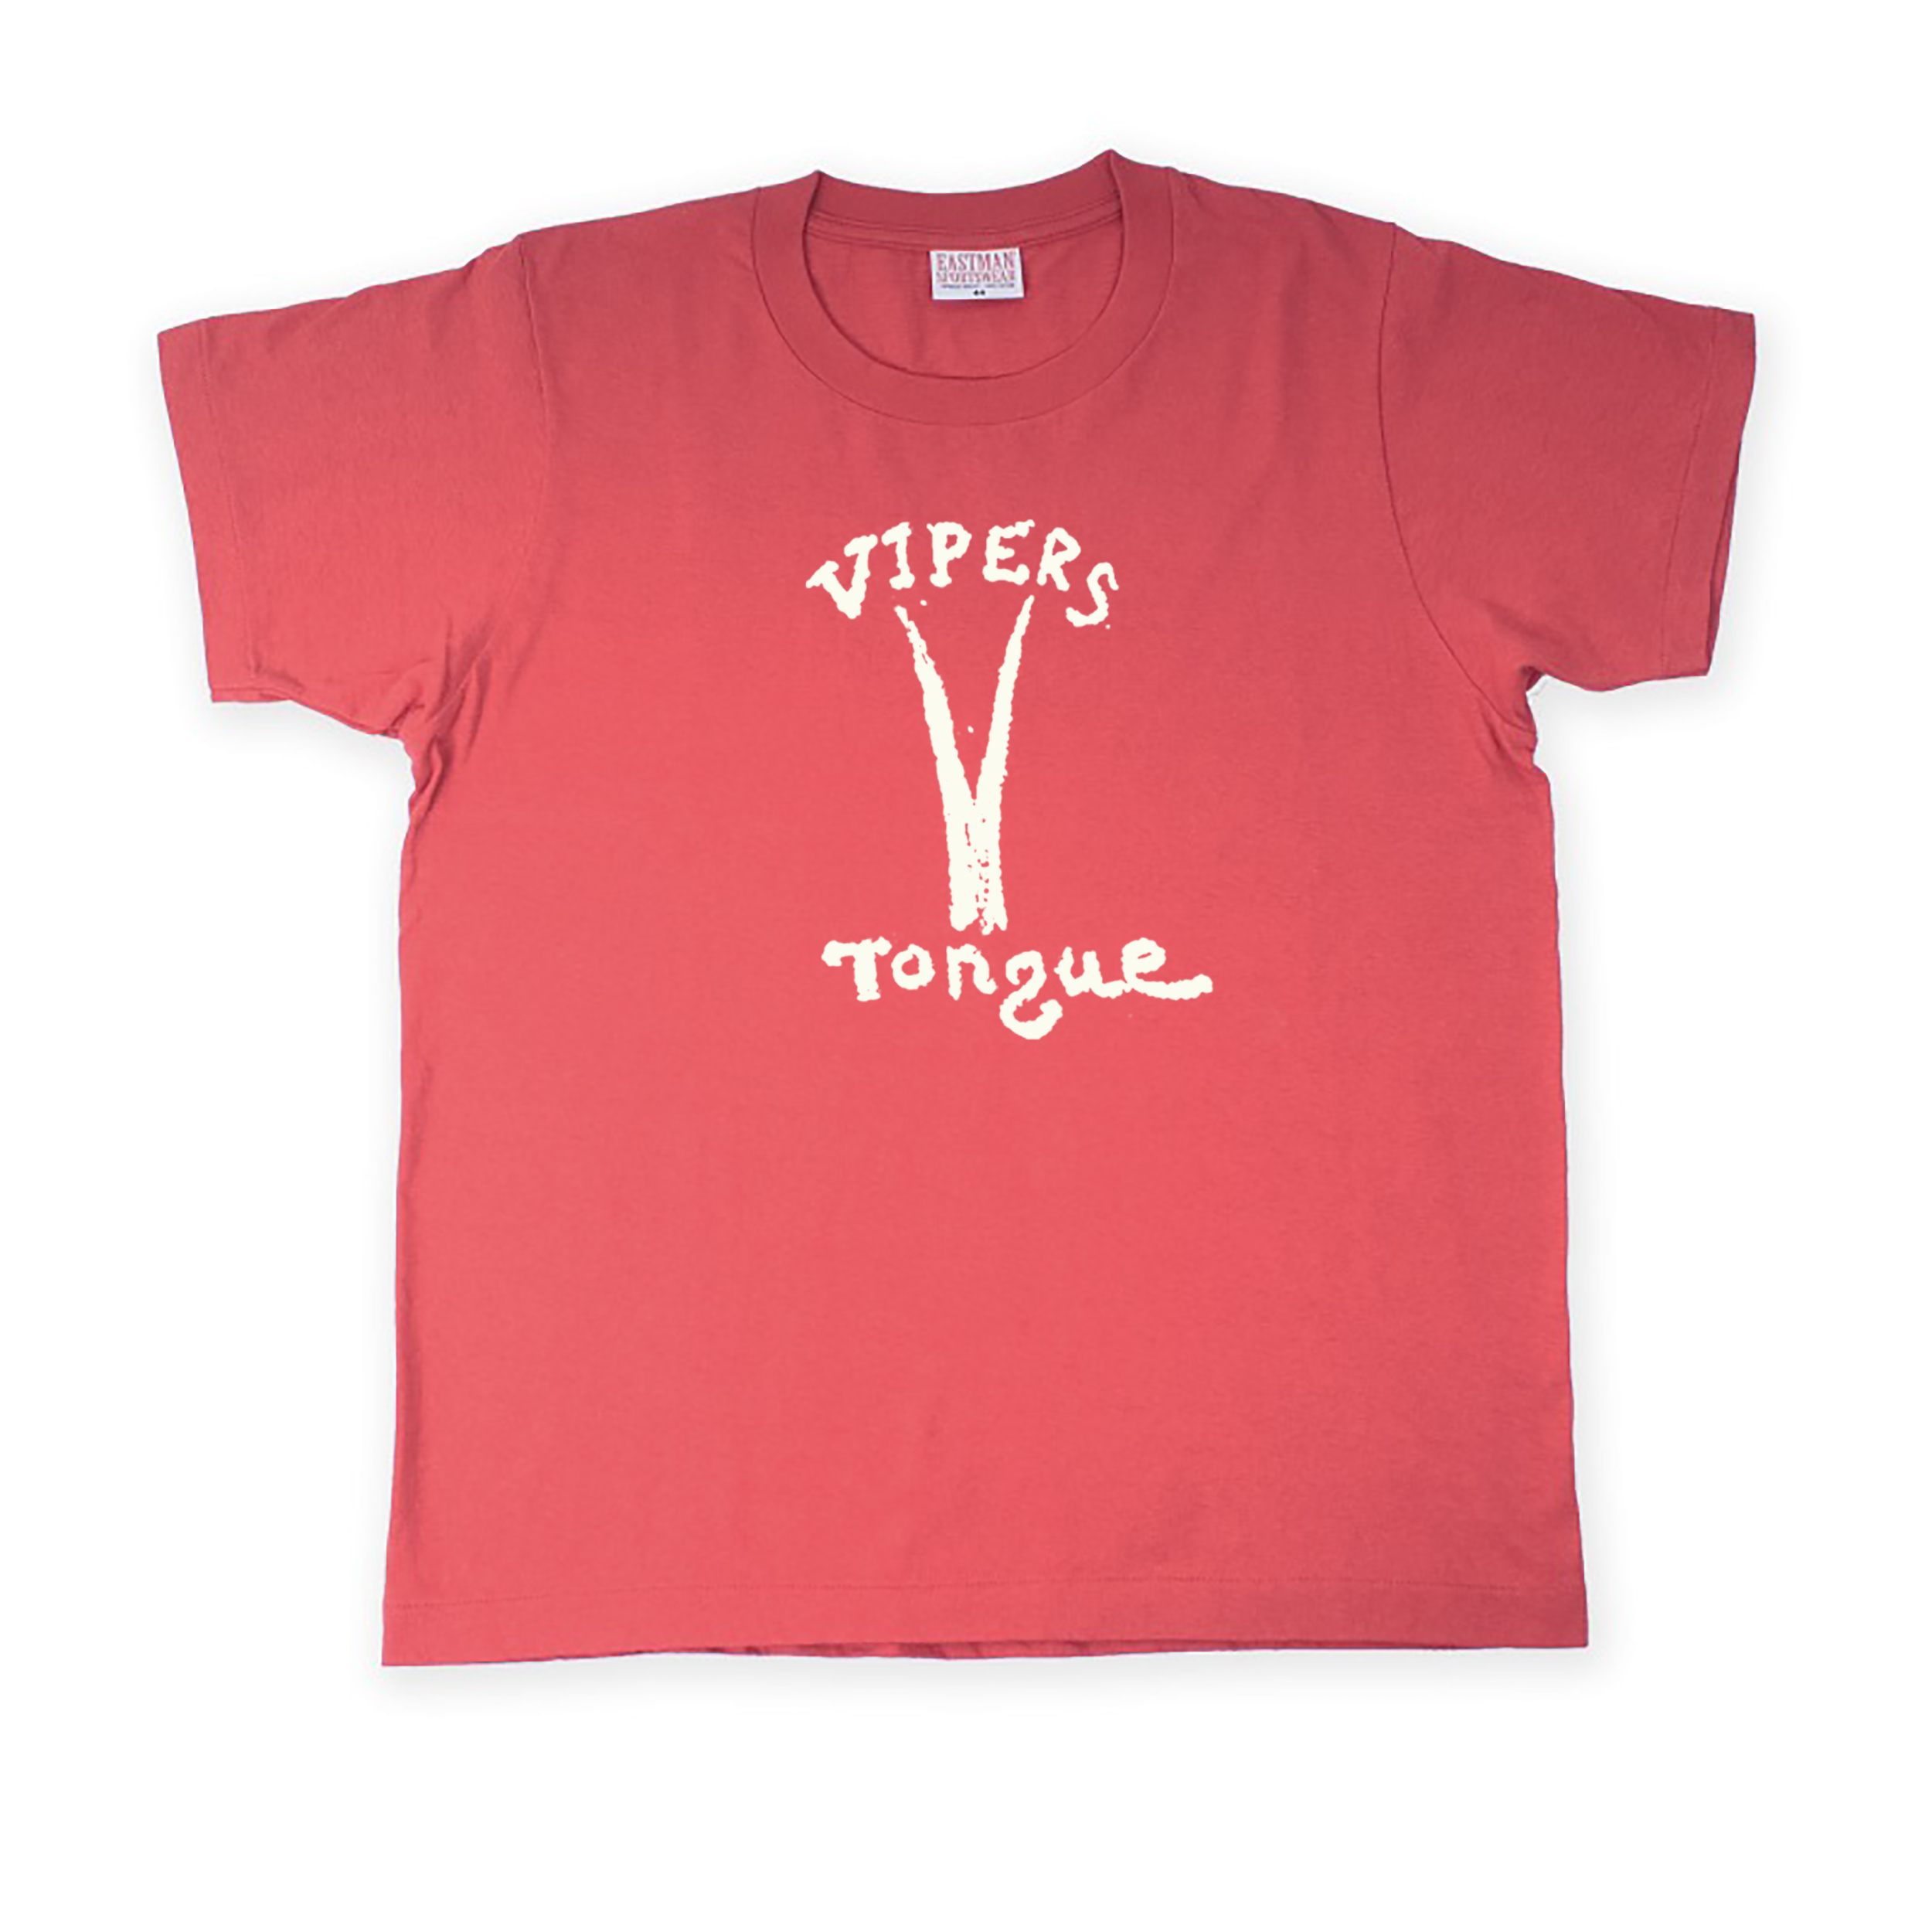 Vipers tongue-red-tee